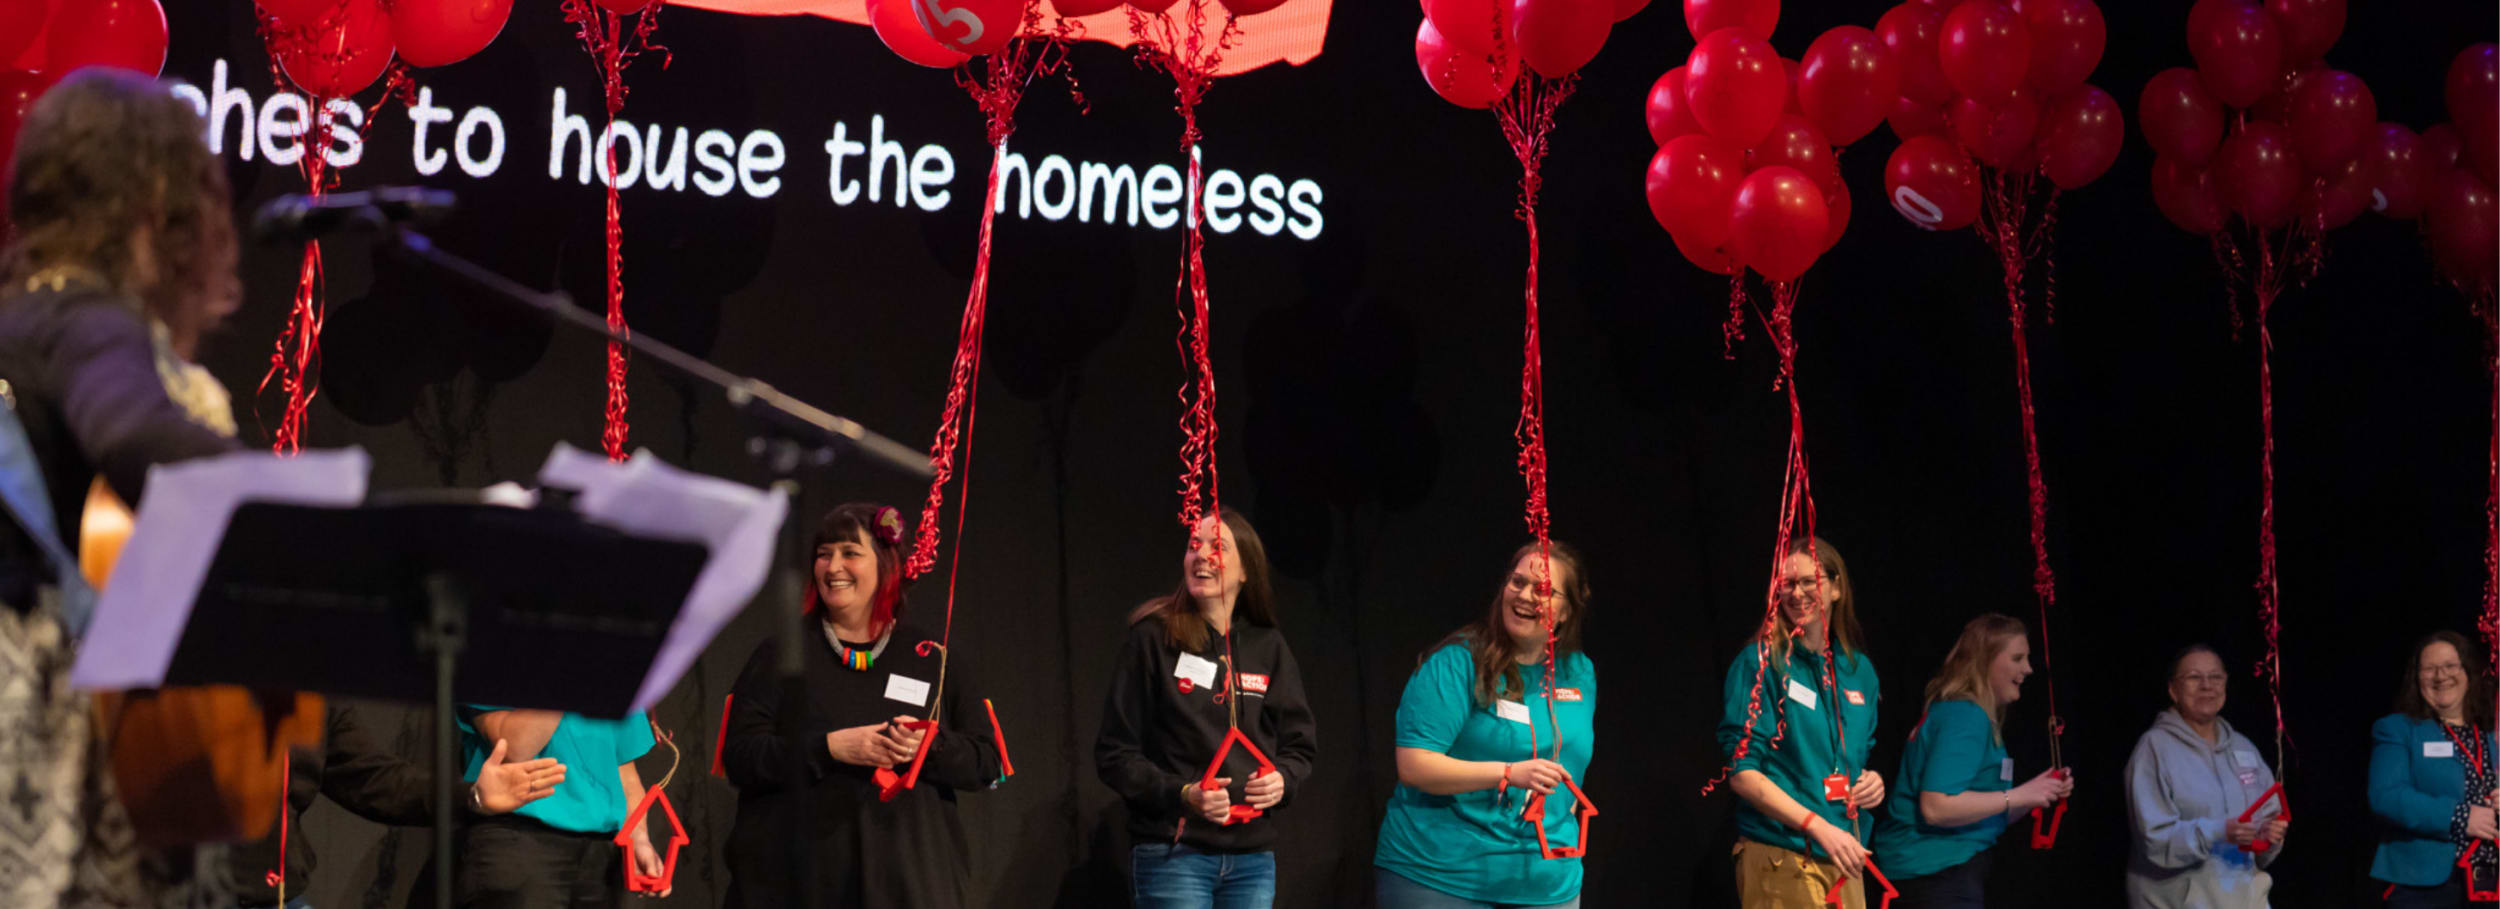 Churches housing the homeless: conference reflections